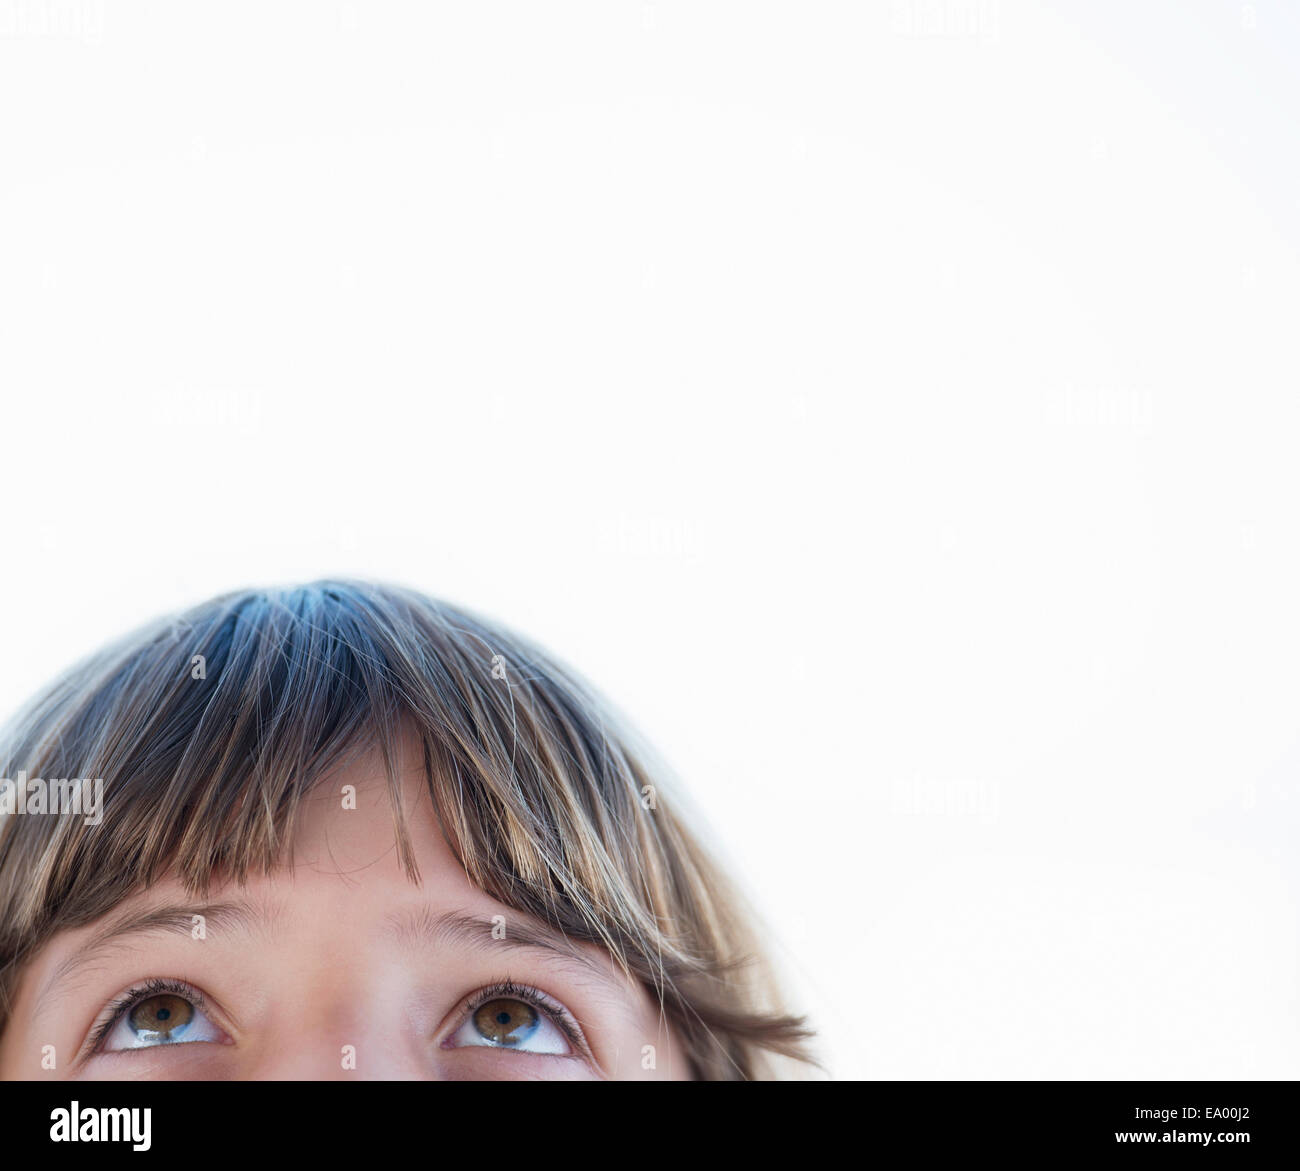 Cropped close up portrait of girl looking upward Stock Photo